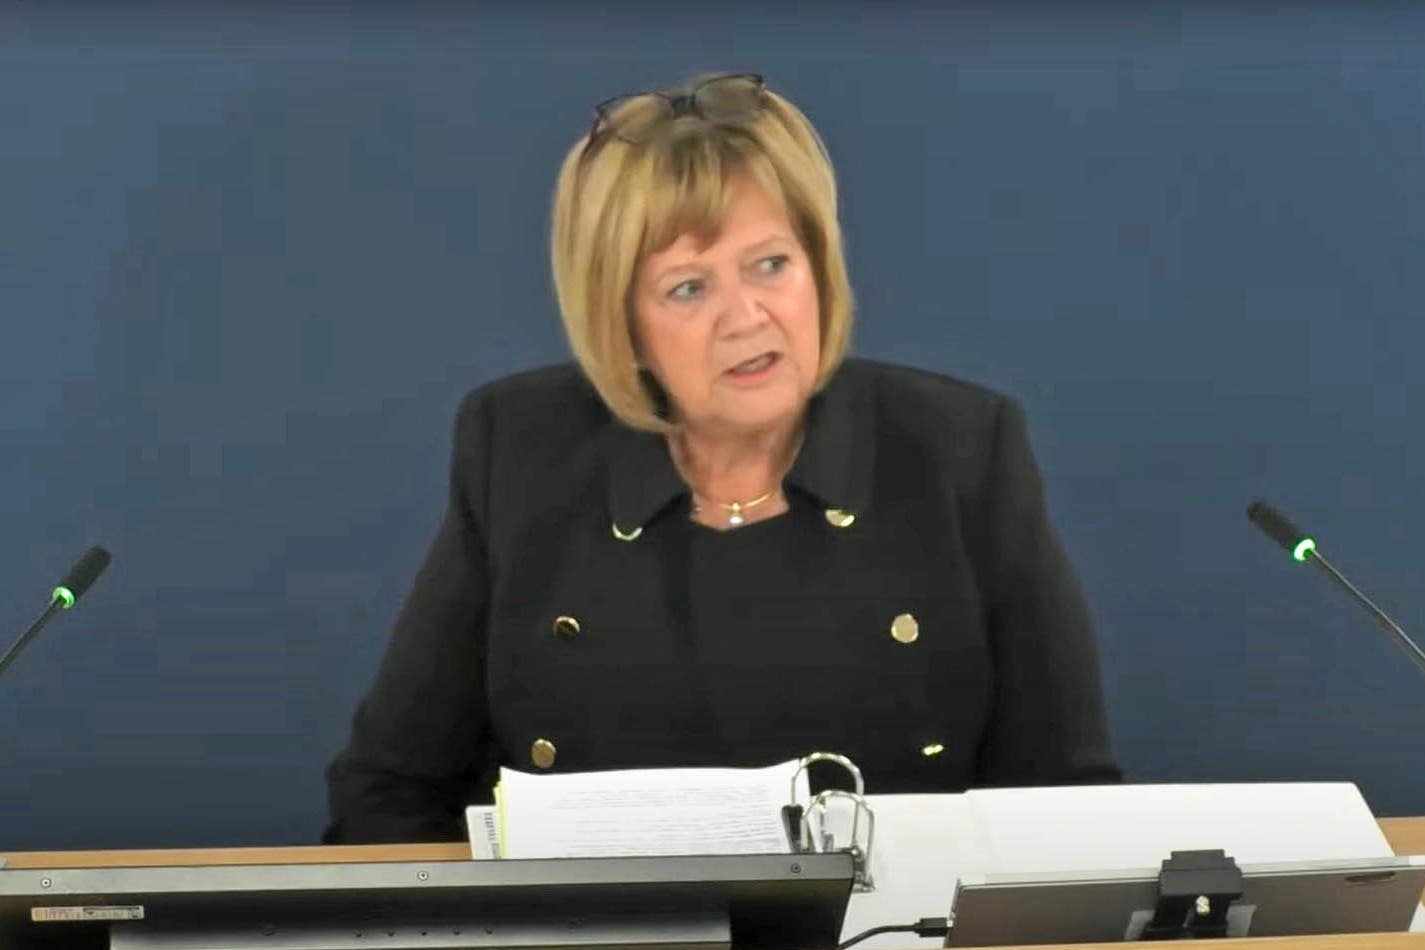 Chair of the UK Covid-19 Inquiry Baroness Hallett